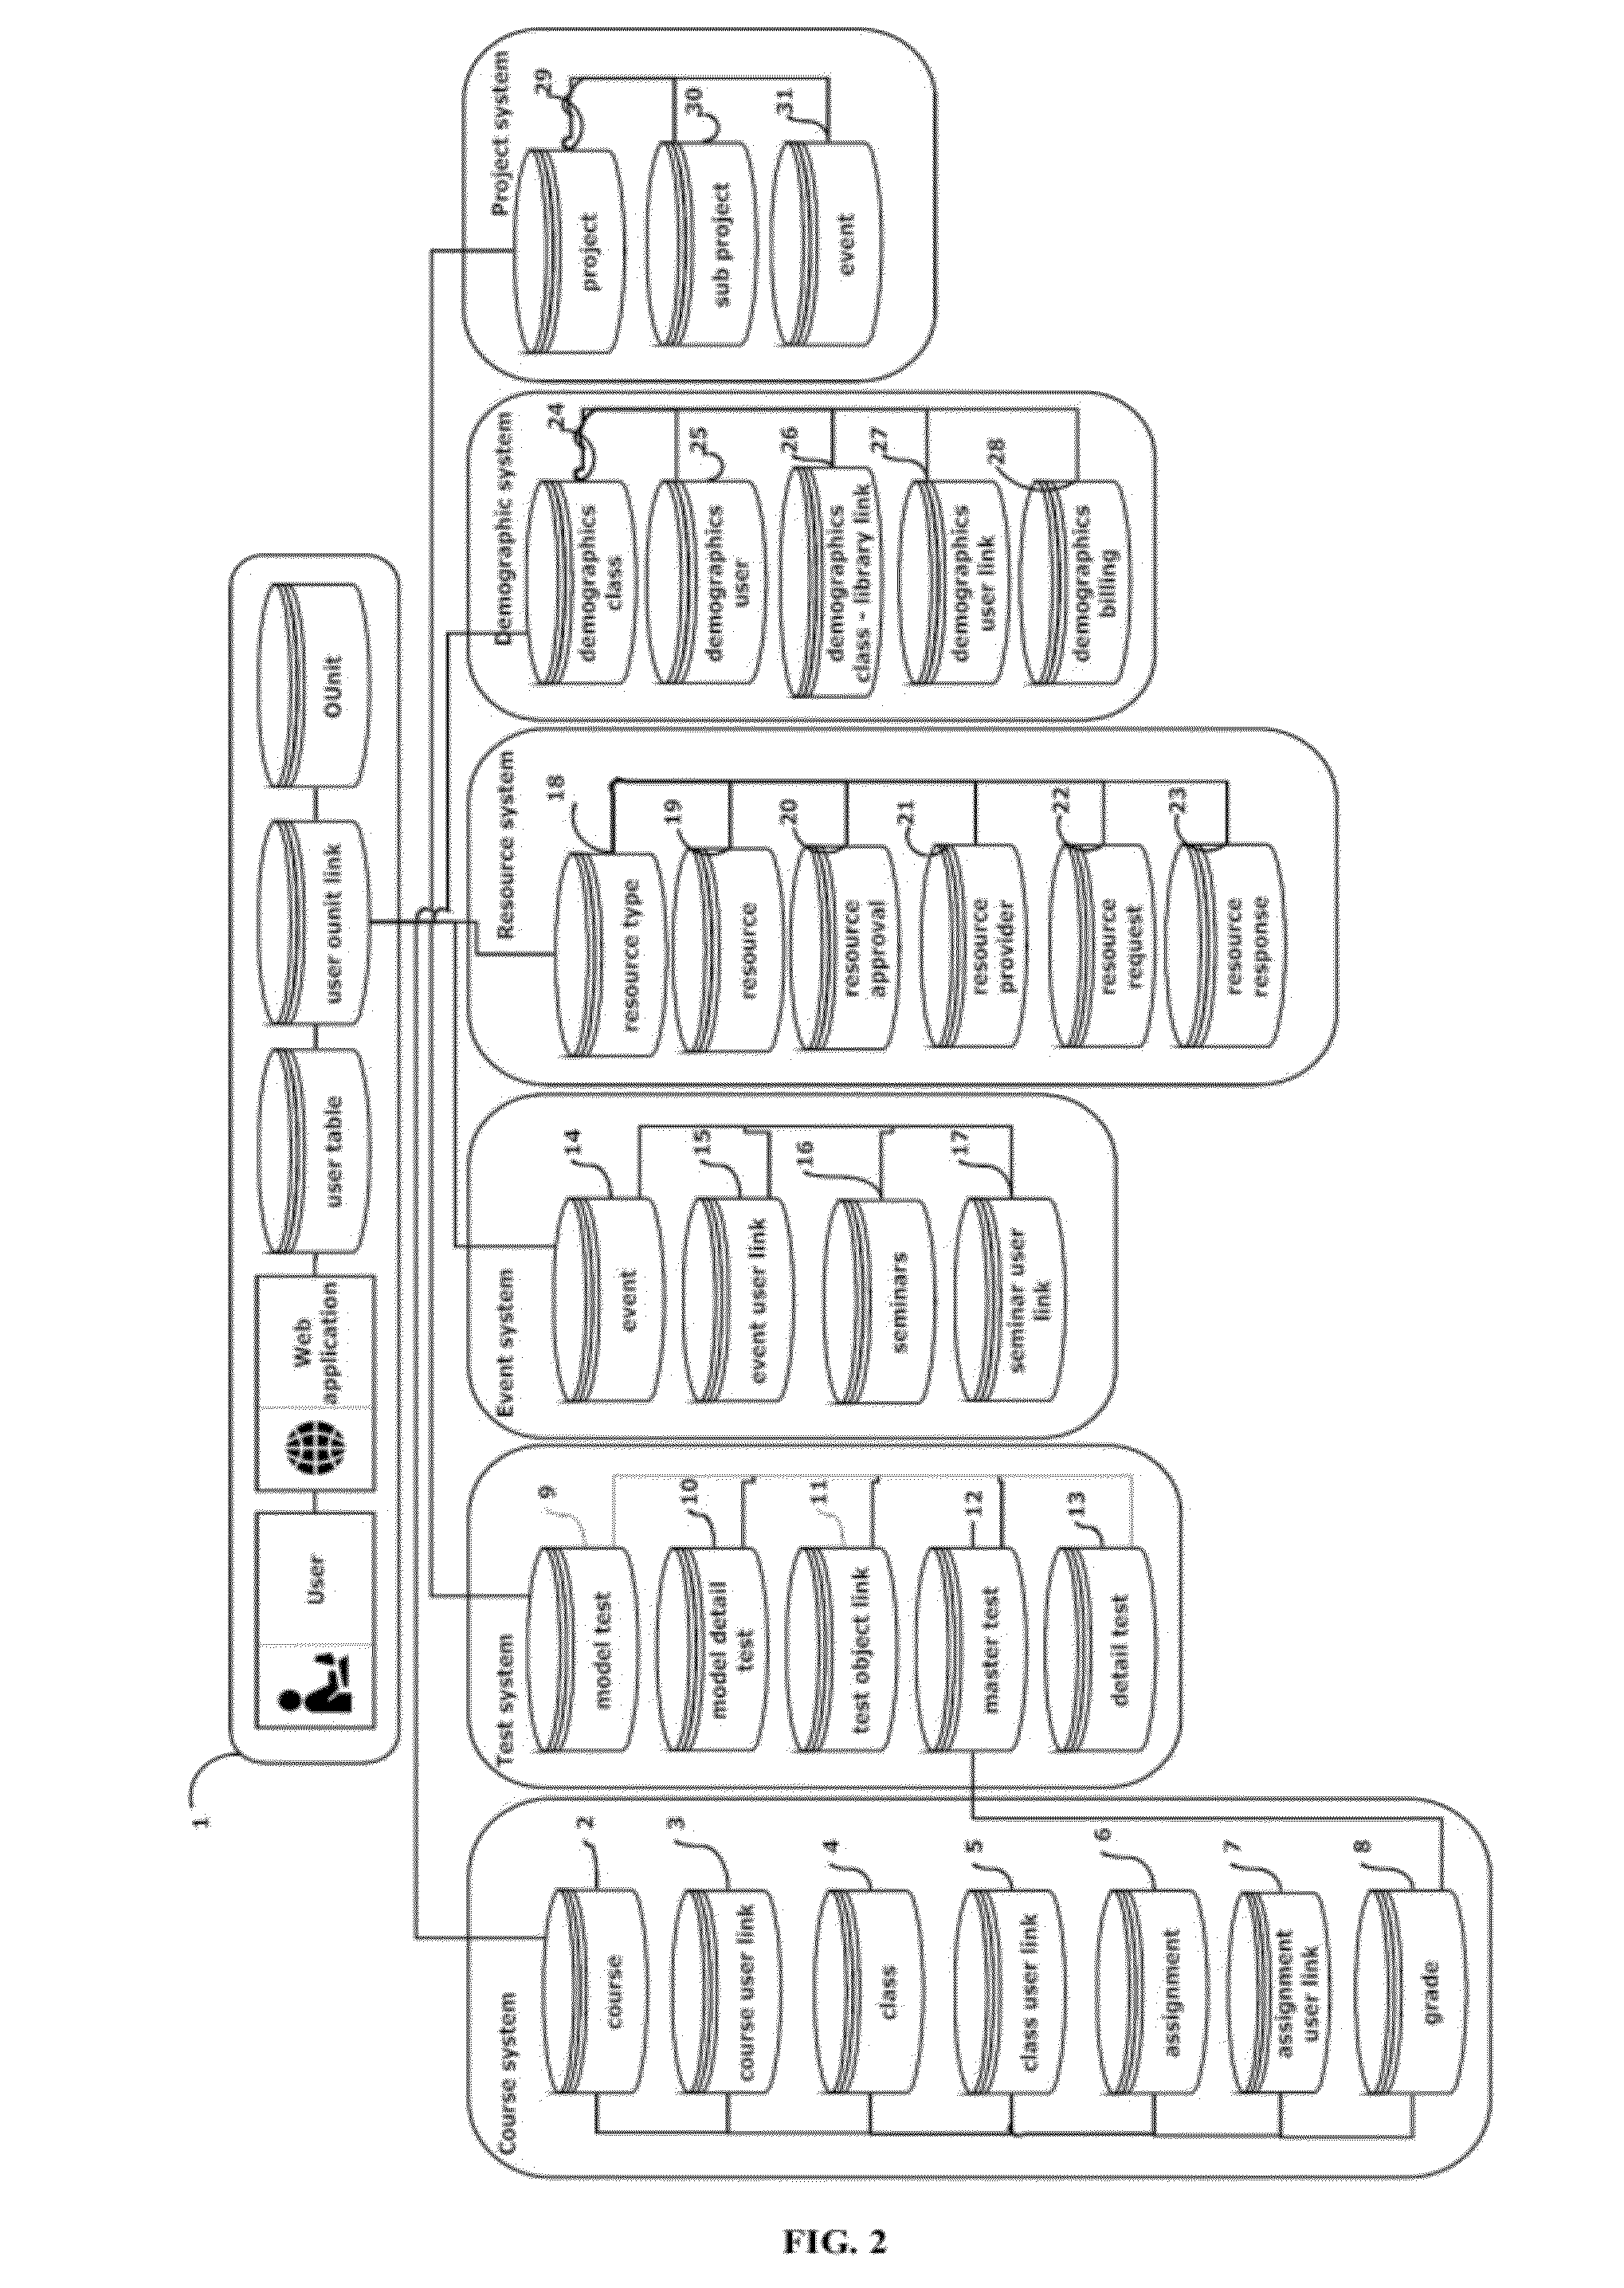 System for scaling a system of related windows-based servers of all types operating in a cloud system, including file management and presentation, in a completely secured and encrypted system